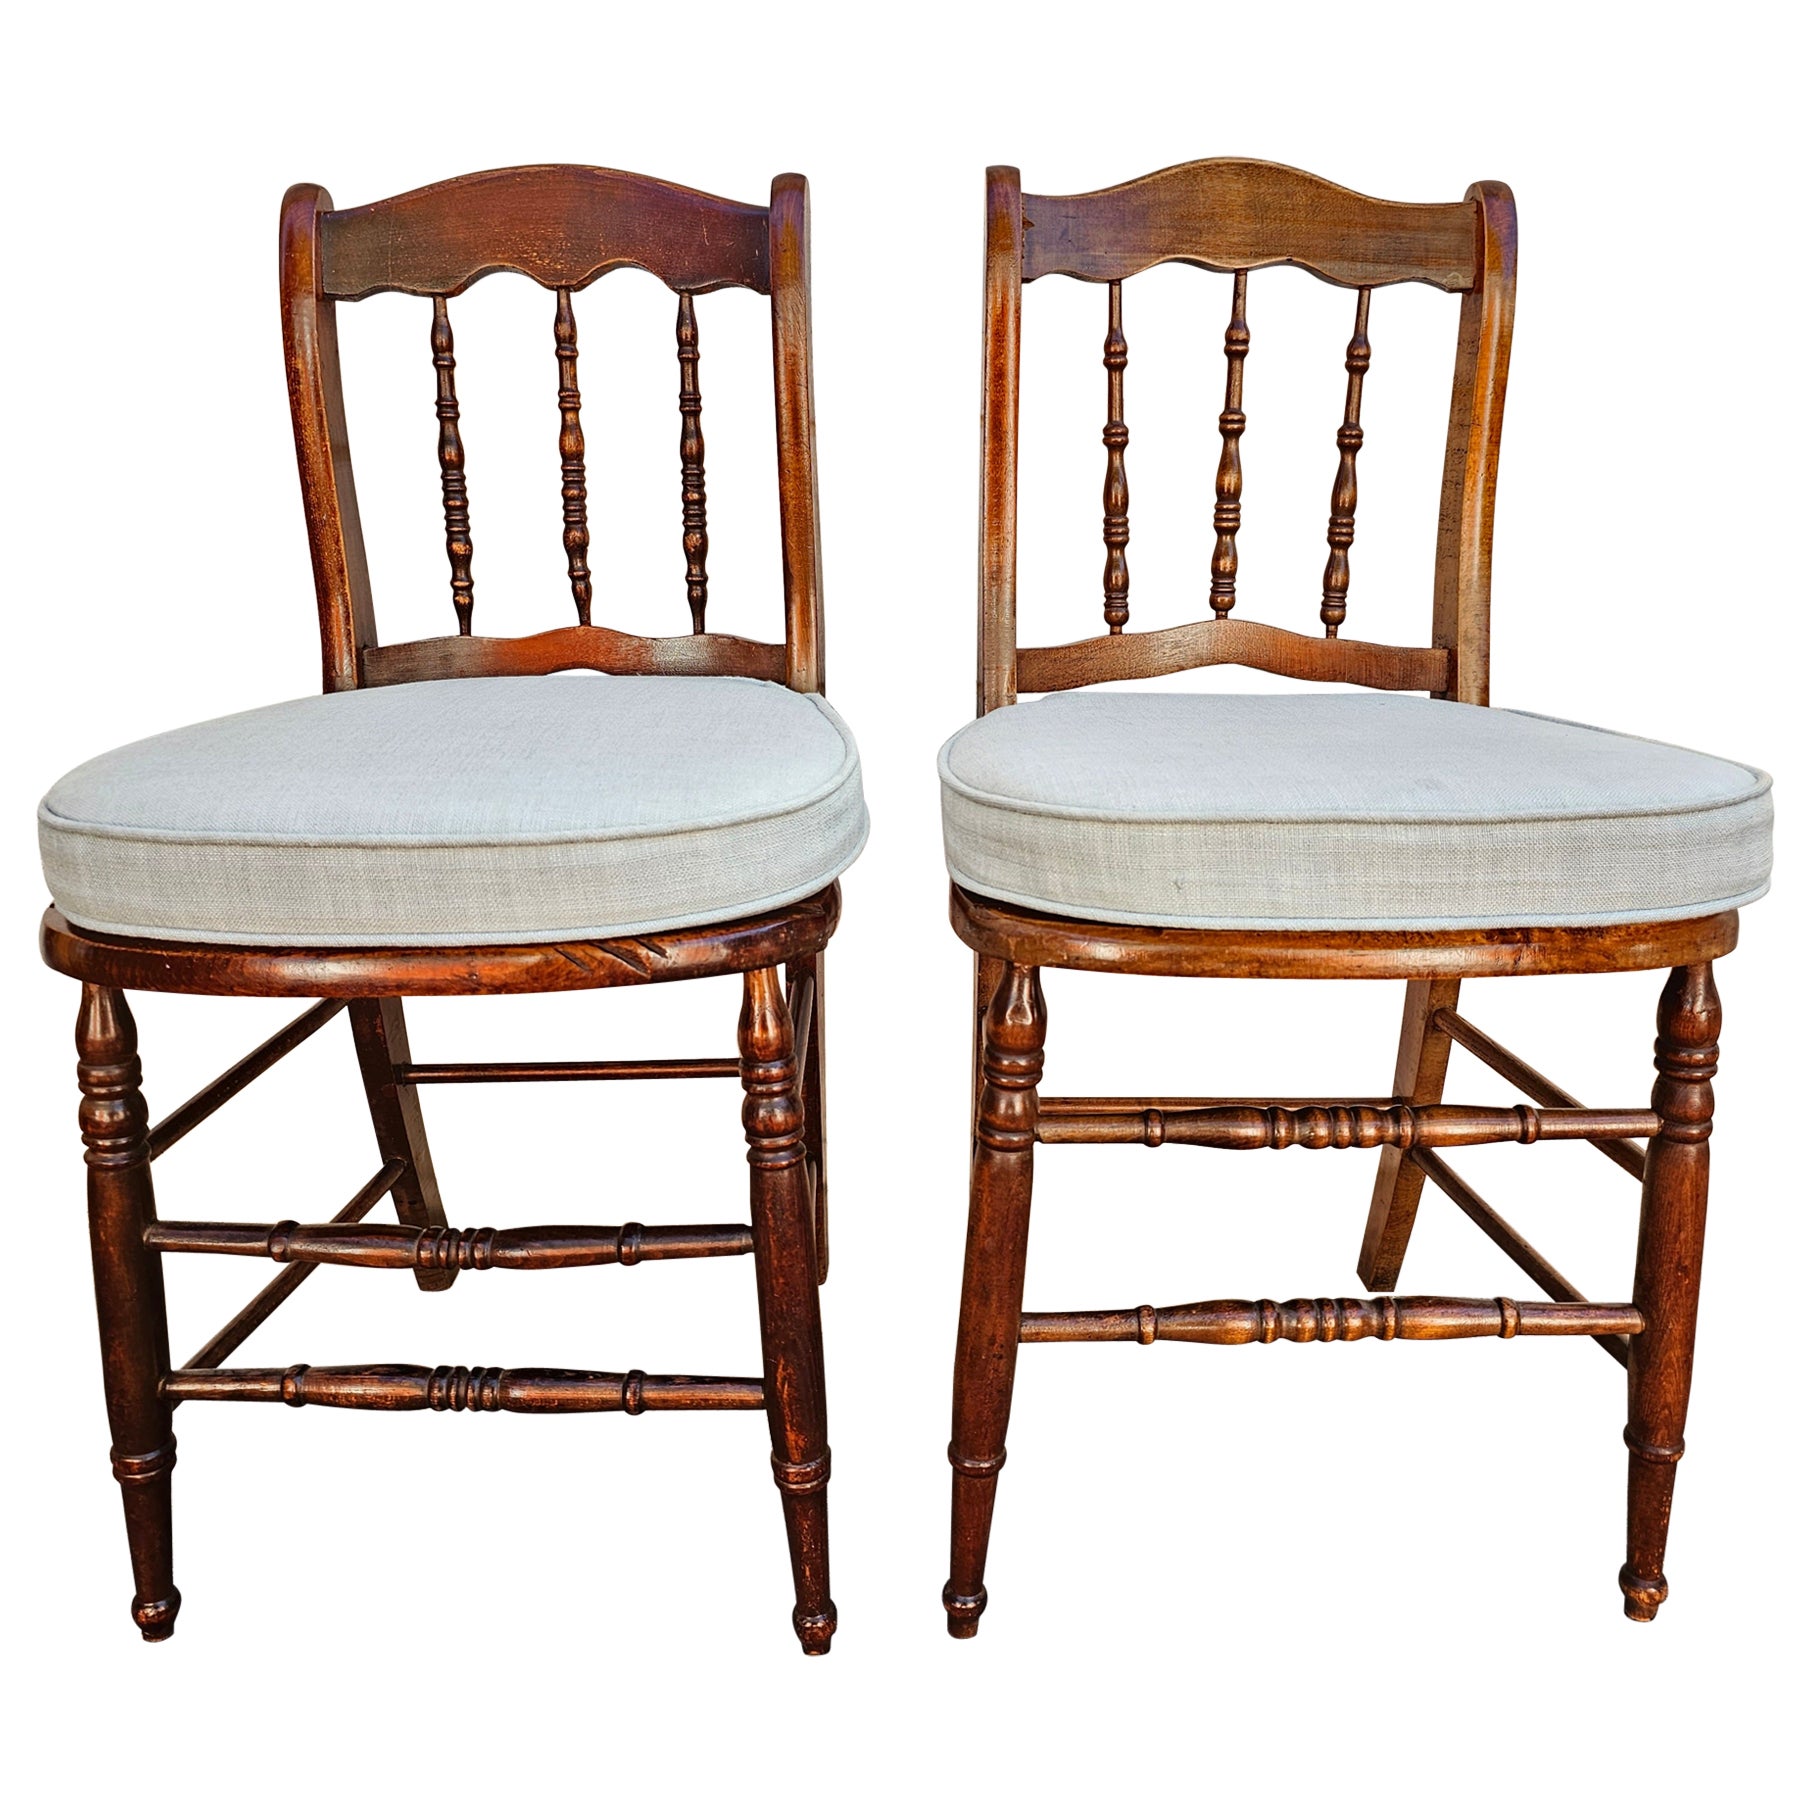 Pair Victorian Mahogany Spindle and Cane Seat Side Chairs with Custom Cushion